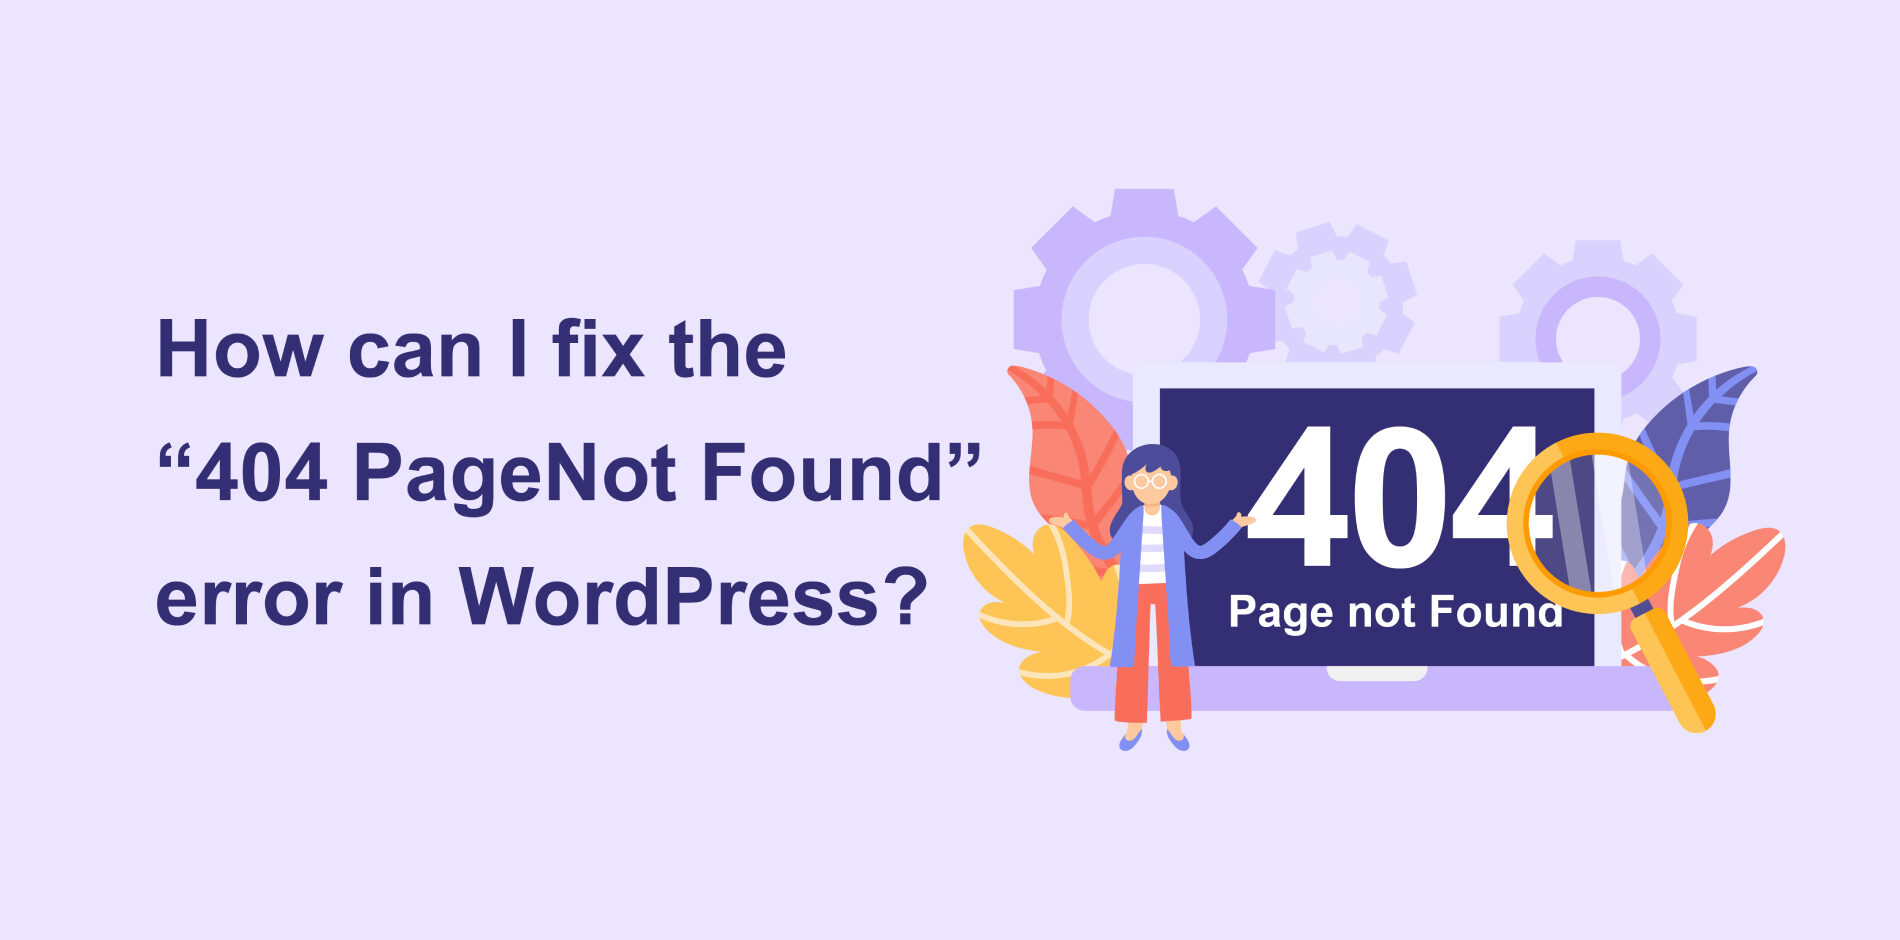 How can I fix the "404 Page Not Found" error in WordPress?